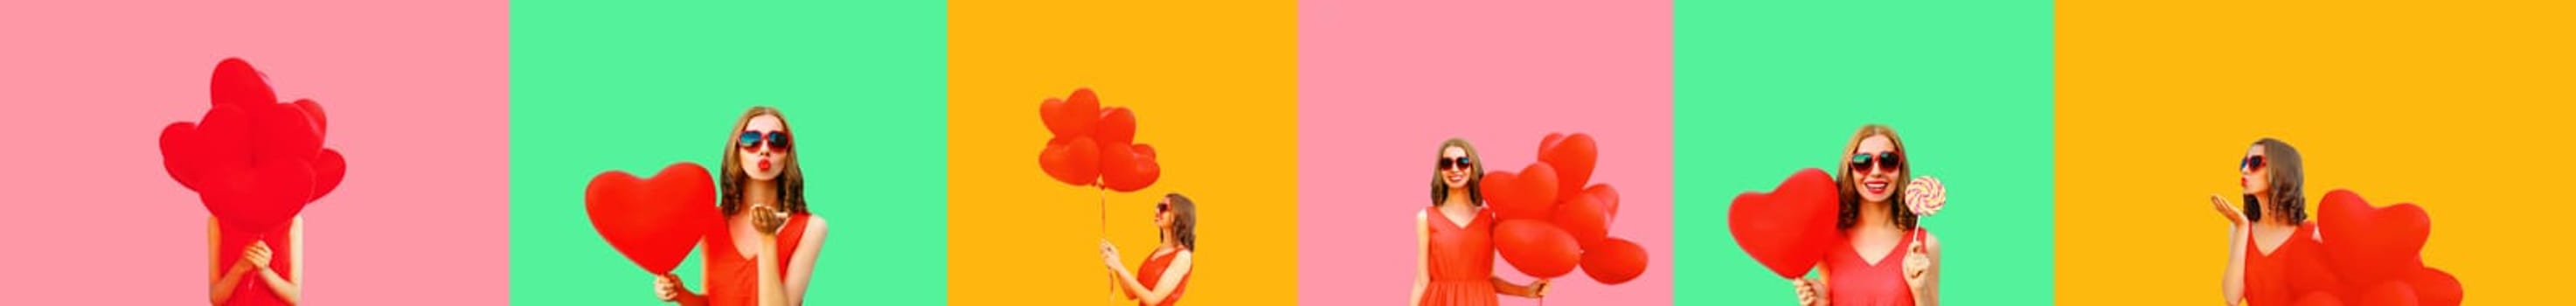 Collage of different happy smiling young woman with red heart shaped balloons having fun on colorful green pink background